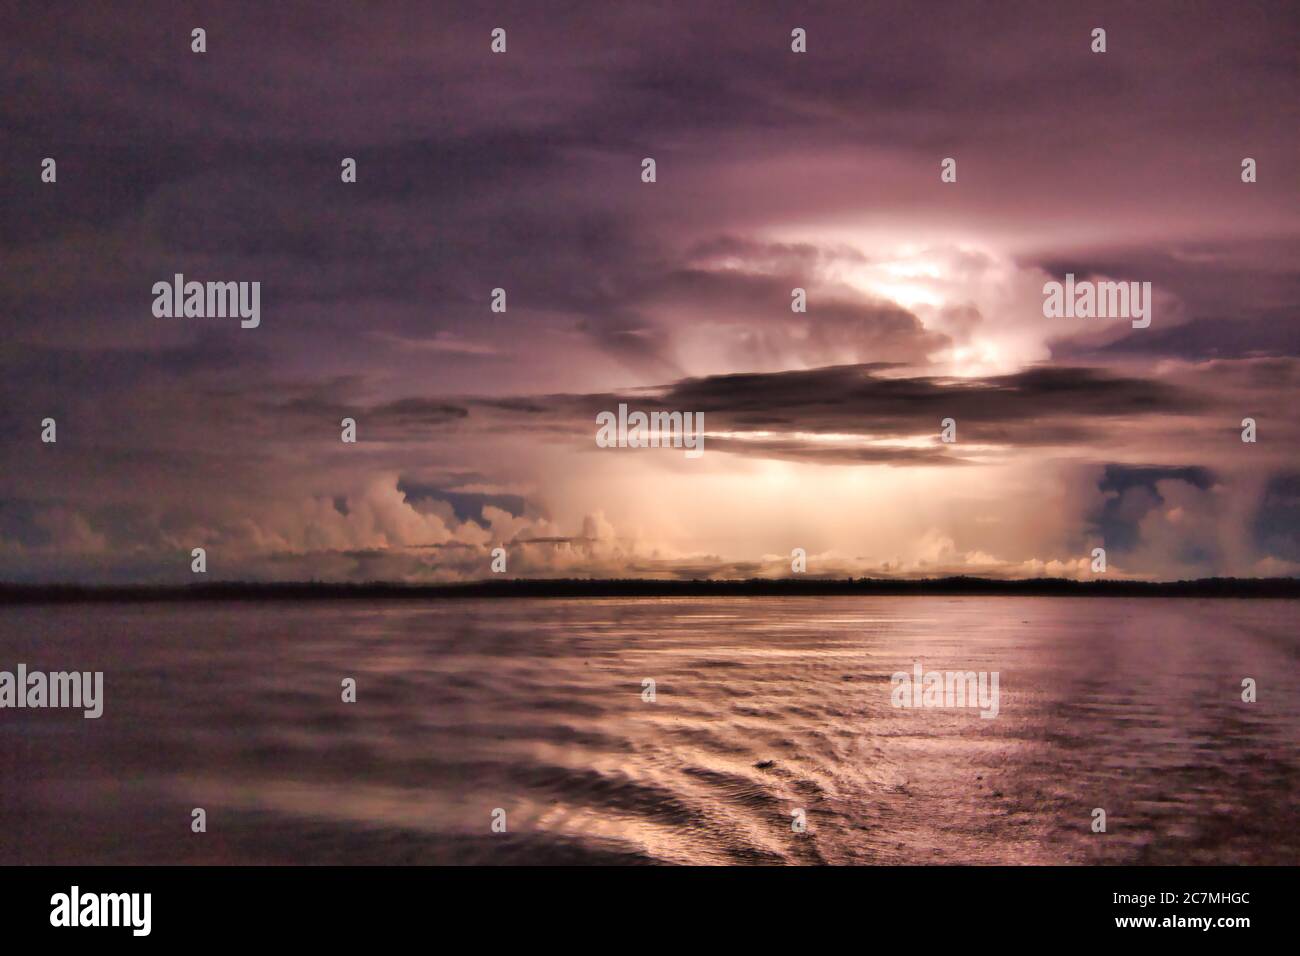 Sheet lightning amongst the clouds at night over the River Amazon illuminating the dark storm clouds from within Stock Photo